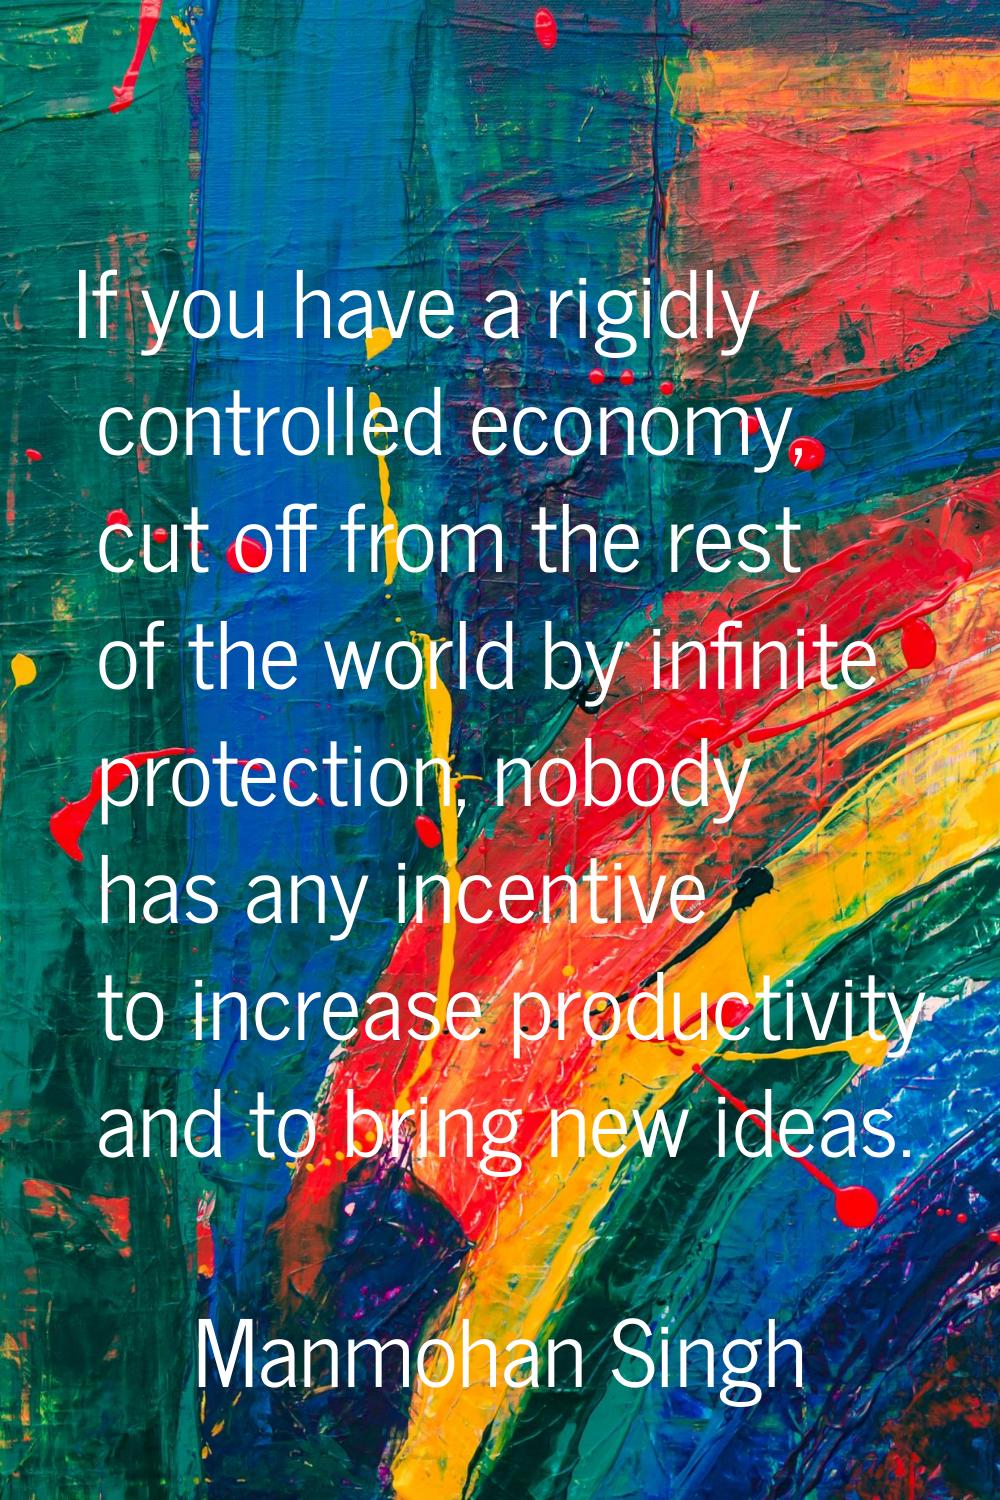 If you have a rigidly controlled economy, cut off from the rest of the world by infinite protection